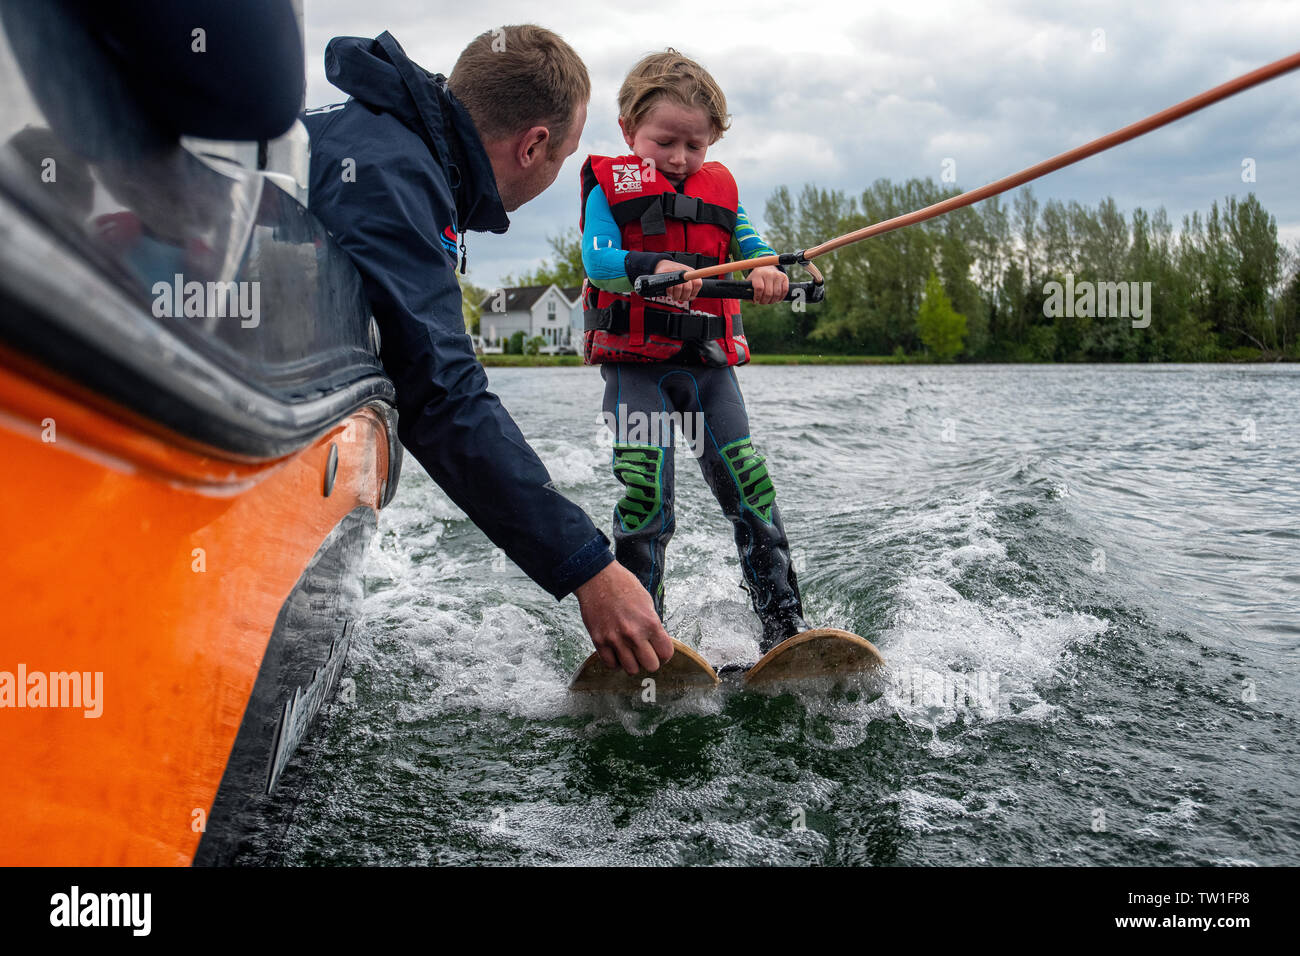 A five year old boy learns to waterski on a lake in the Cotswolds, Gloucestershire, England. Stock Photo